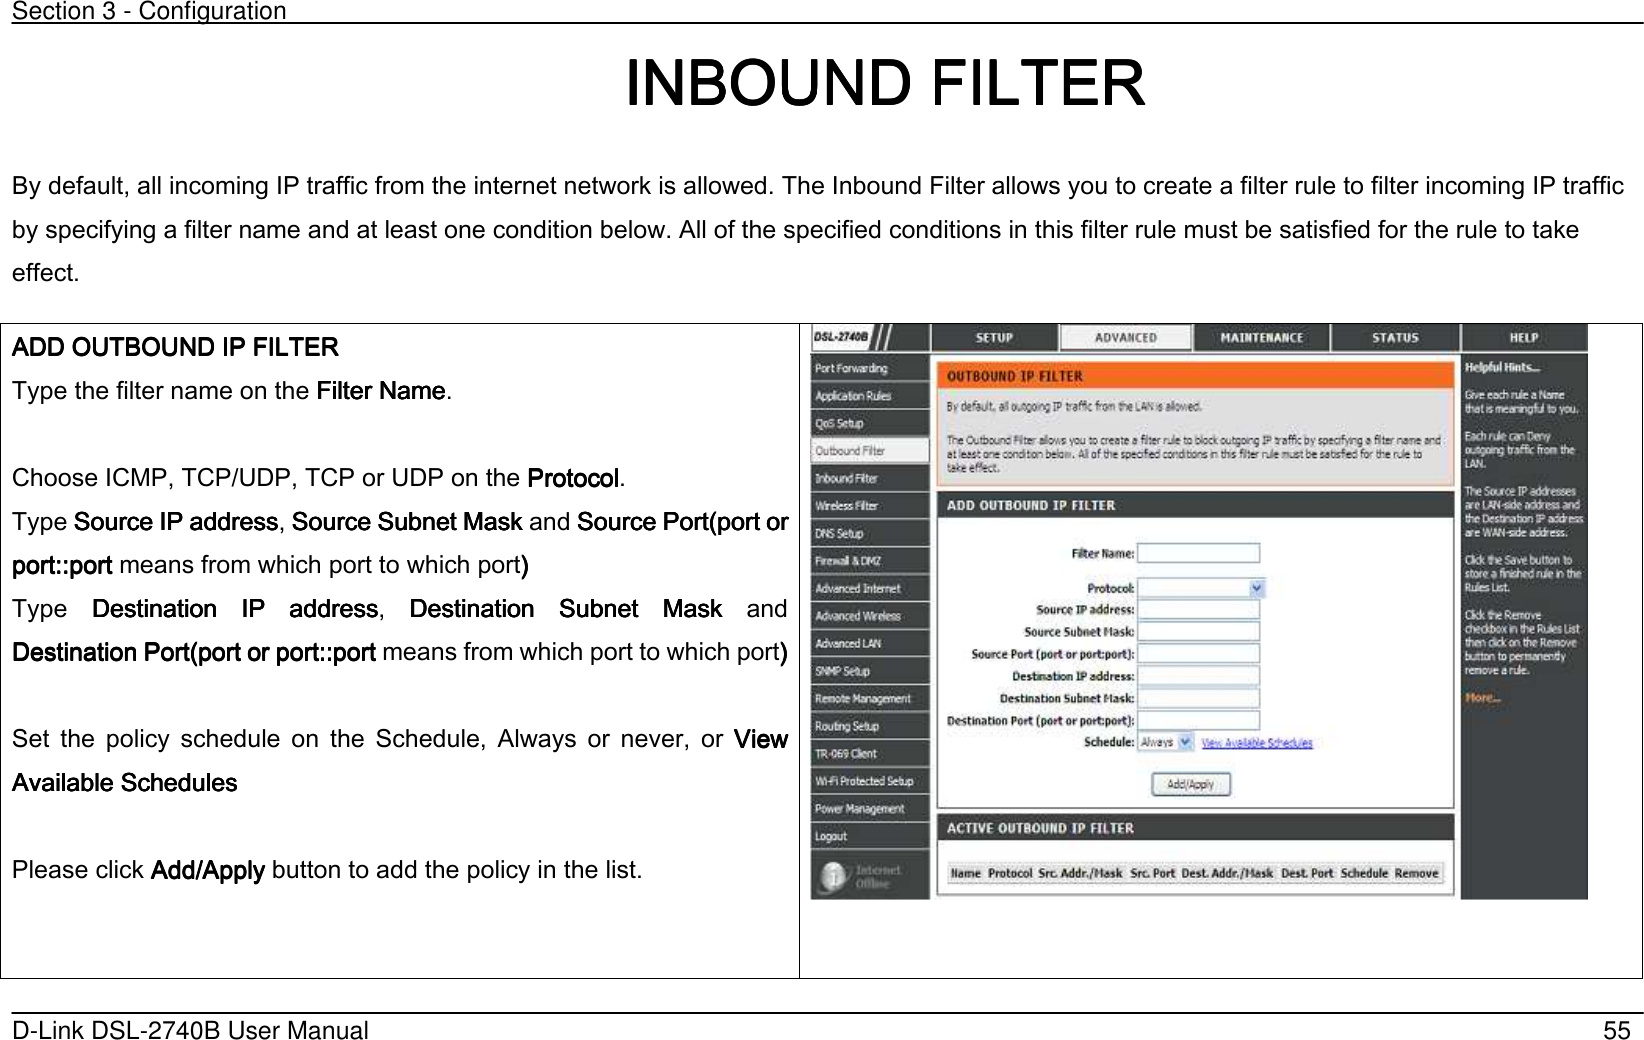 Section 3 - Configuration   D-Link DSL-2740B User Manual                                                  55                                                                             IIIINBOUND NBOUND NBOUND NBOUND FILTERFILTERFILTERFILTER    By default, all incoming IP traffic from the internet network is allowed. The Inbound Filter allows you to create a filter rule to filter incoming IP traffic by specifying a filter name and at least one condition below. All of the specified conditions in this filter rule must be satisfied for the rule to take effect. AAAADD OUTBOUND IP FILTERDD OUTBOUND IP FILTERDD OUTBOUND IP FILTERDD OUTBOUND IP FILTER    Type the filter name on the Filter NameFilter NameFilter NameFilter Name.  Choose ICMP, TCP/UDP, TCP or UDP on the ProtocolProtocolProtocolProtocol. Type Source IP addressSource IP addressSource IP addressSource IP address, Source Subnet Mask Source Subnet Mask Source Subnet Mask Source Subnet Mask and Source Port(port Source Port(port Source Port(port Source Port(port or or or or port:port:port:port:::::portportportport means from which port to which port’ ’ ’ ’      Type  DestinationDestinationDestinationDestination  IP  address  IP  address  IP  address  IP  address,  DestinationDestinationDestinationDestination  Subnet  Mask   Subnet  Mask   Subnet  Mask   Subnet  Mask  and DestinationDestinationDestinationDestination Port(port or  Port(port or  Port(port or  Port(port or port:port:port:port:::::portportportport means from which port to which port’’’’        Set  the  policy  schedule  on  the  Schedule,  Always  or  never,  or  View View View View AvailabAvailabAvailabAvailable Schedulesle Schedulesle Schedulesle Schedules        Please click Add/ApplyAdd/ApplyAdd/ApplyAdd/Apply button to add the policy in the list.   